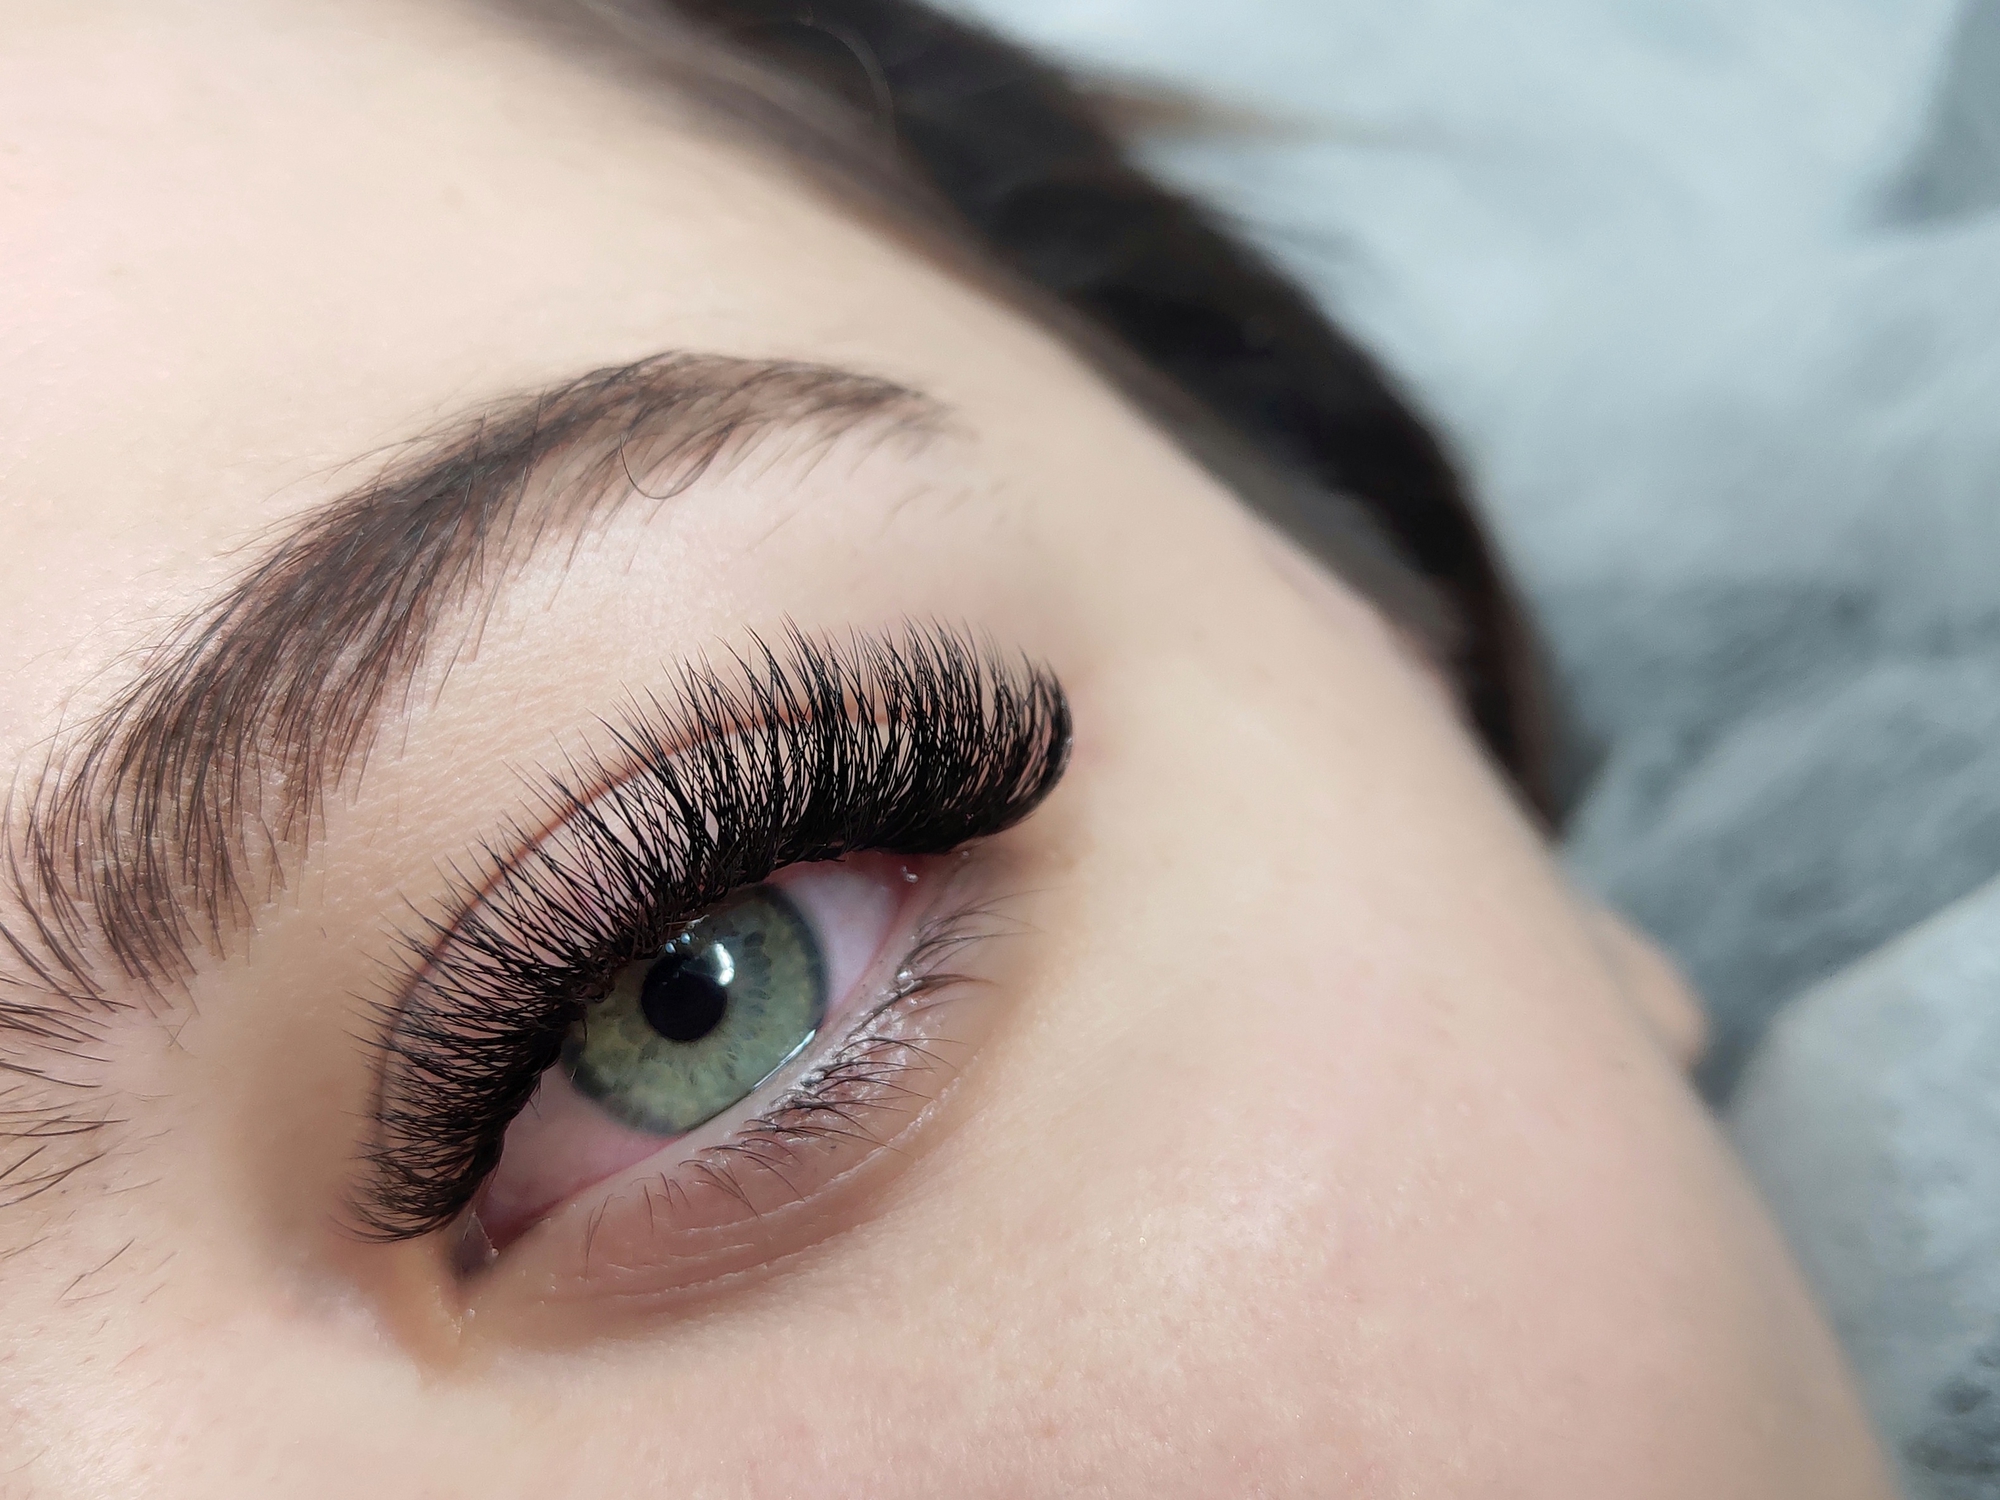 How Long Does It Take For Eyelash Extensions To Fall Out?